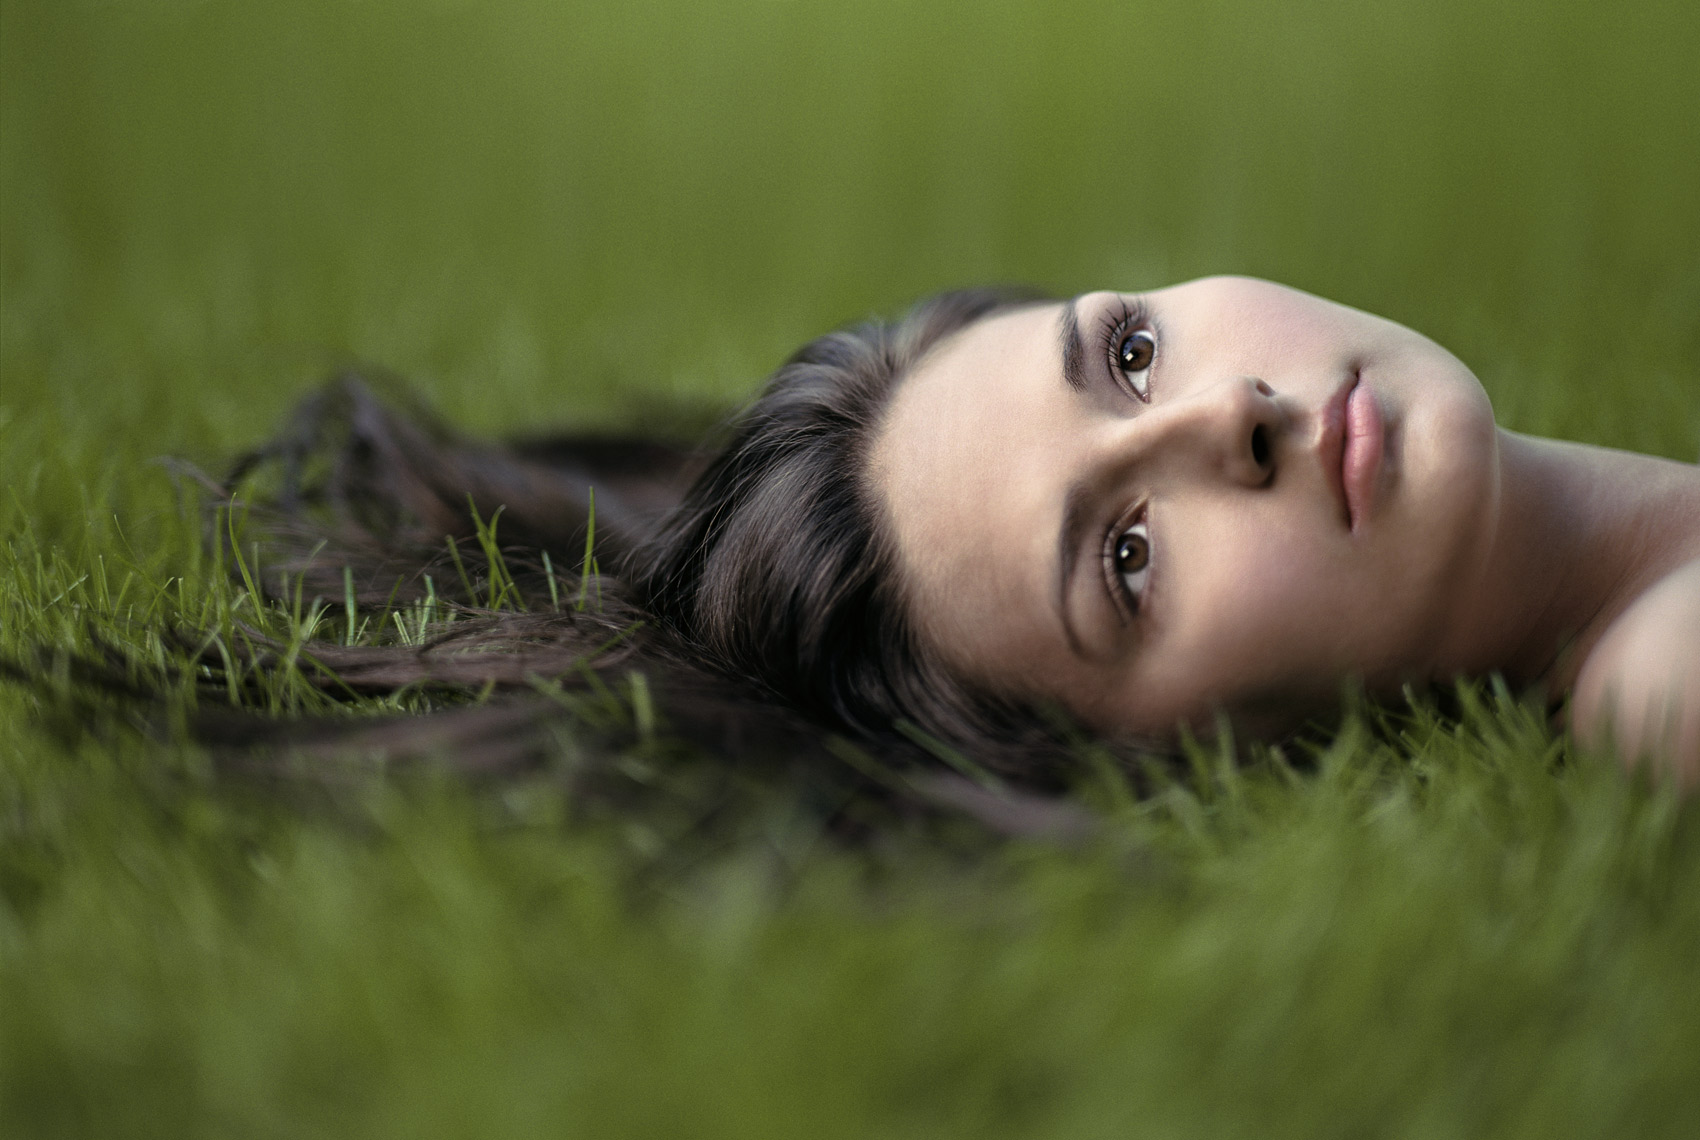 Location portrait of young woman lying in the grass